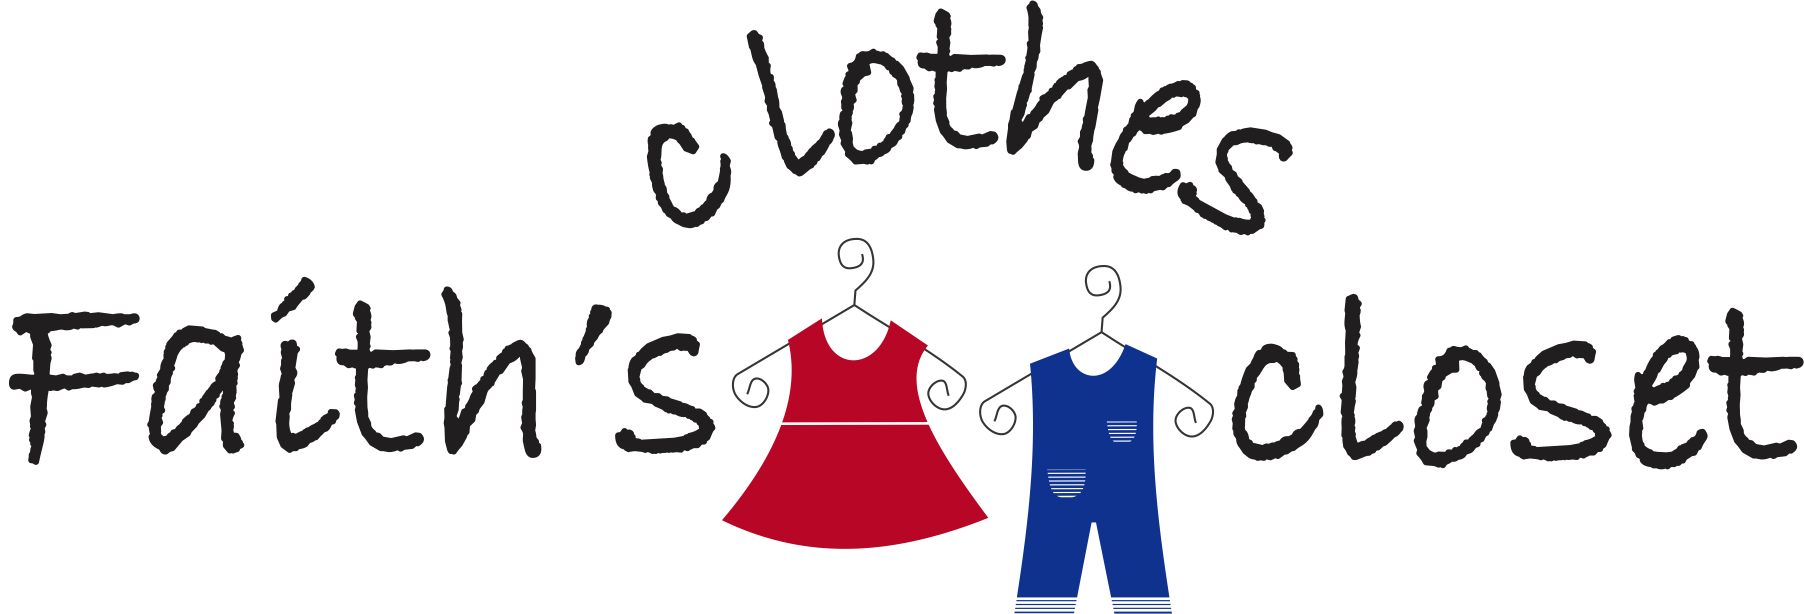 Closet clipart clothing giveaway. Services times assembly of